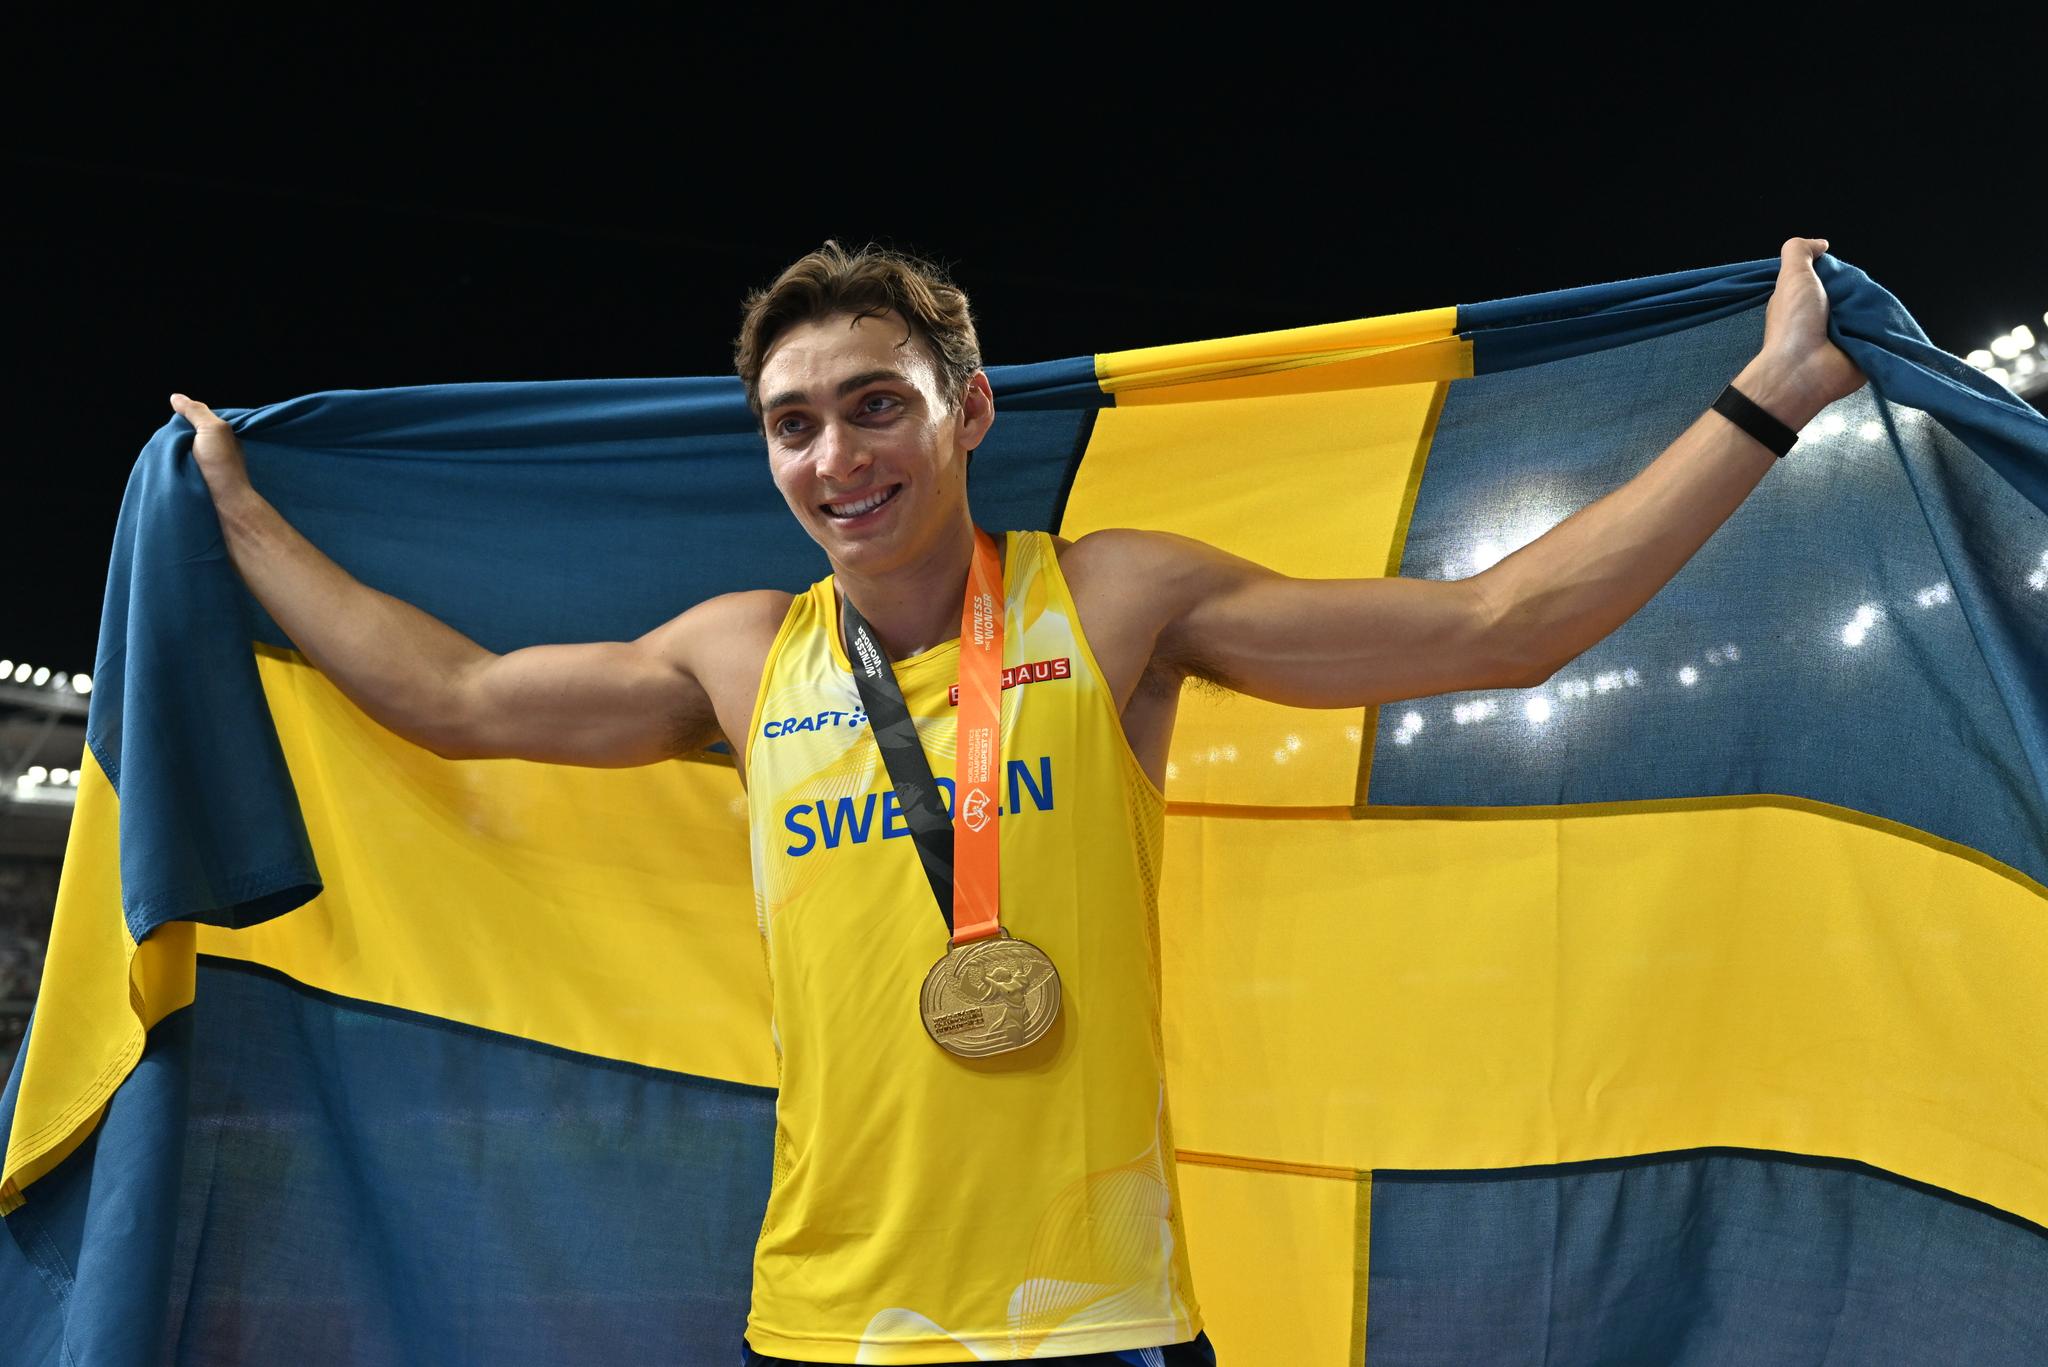 Singles WC gold for Armand Duplantis – challenging his own world record